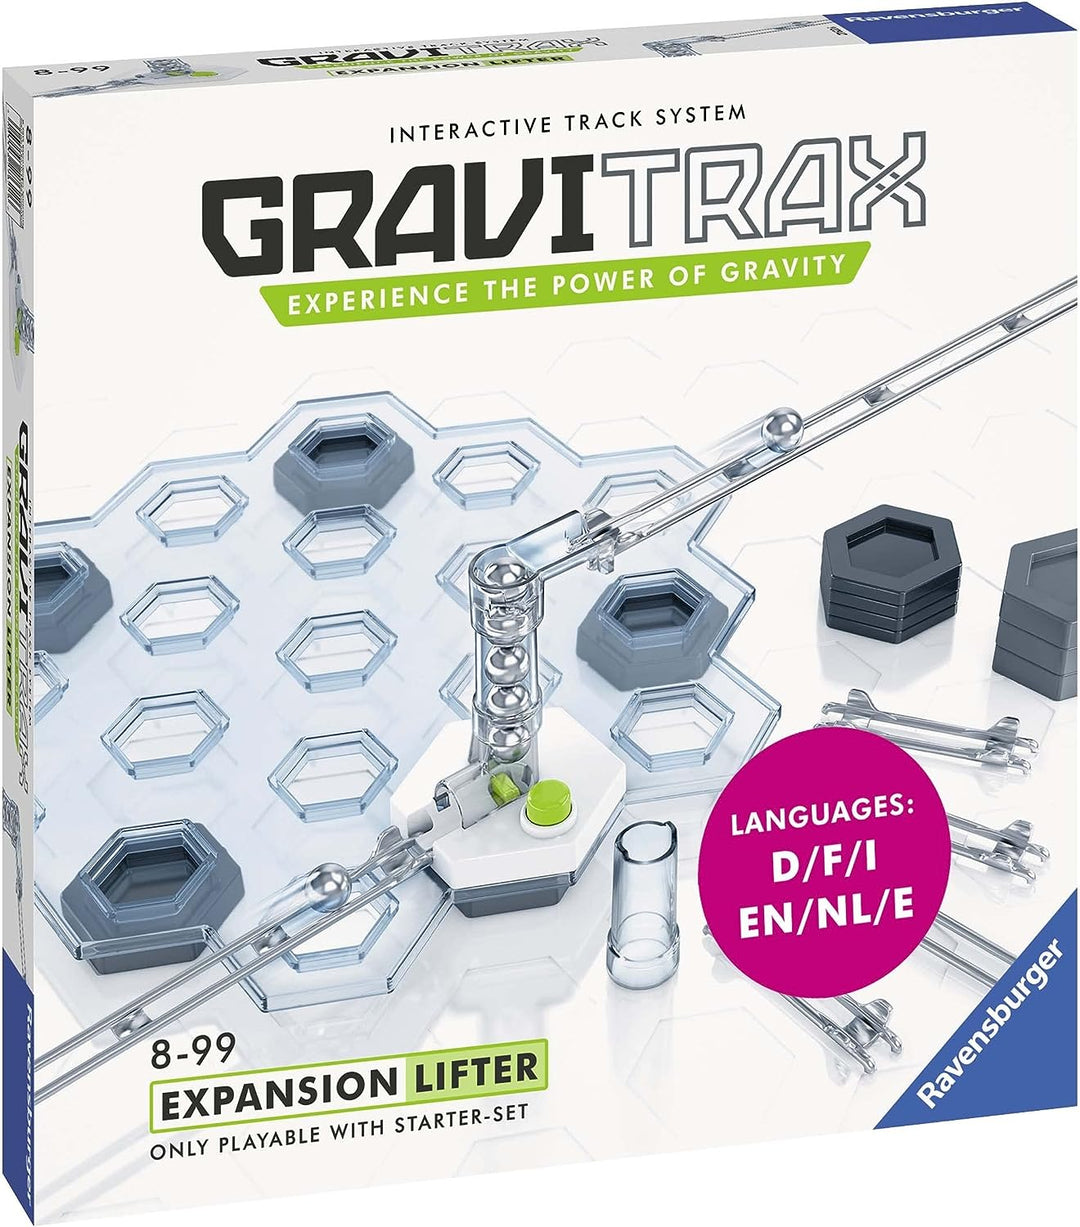 Ravensburger GraviTrax Lift Expansion Pack Add On Extension Accessory - Marble Run and Construction Toy For Kids Age 8 Years and Up - STEM